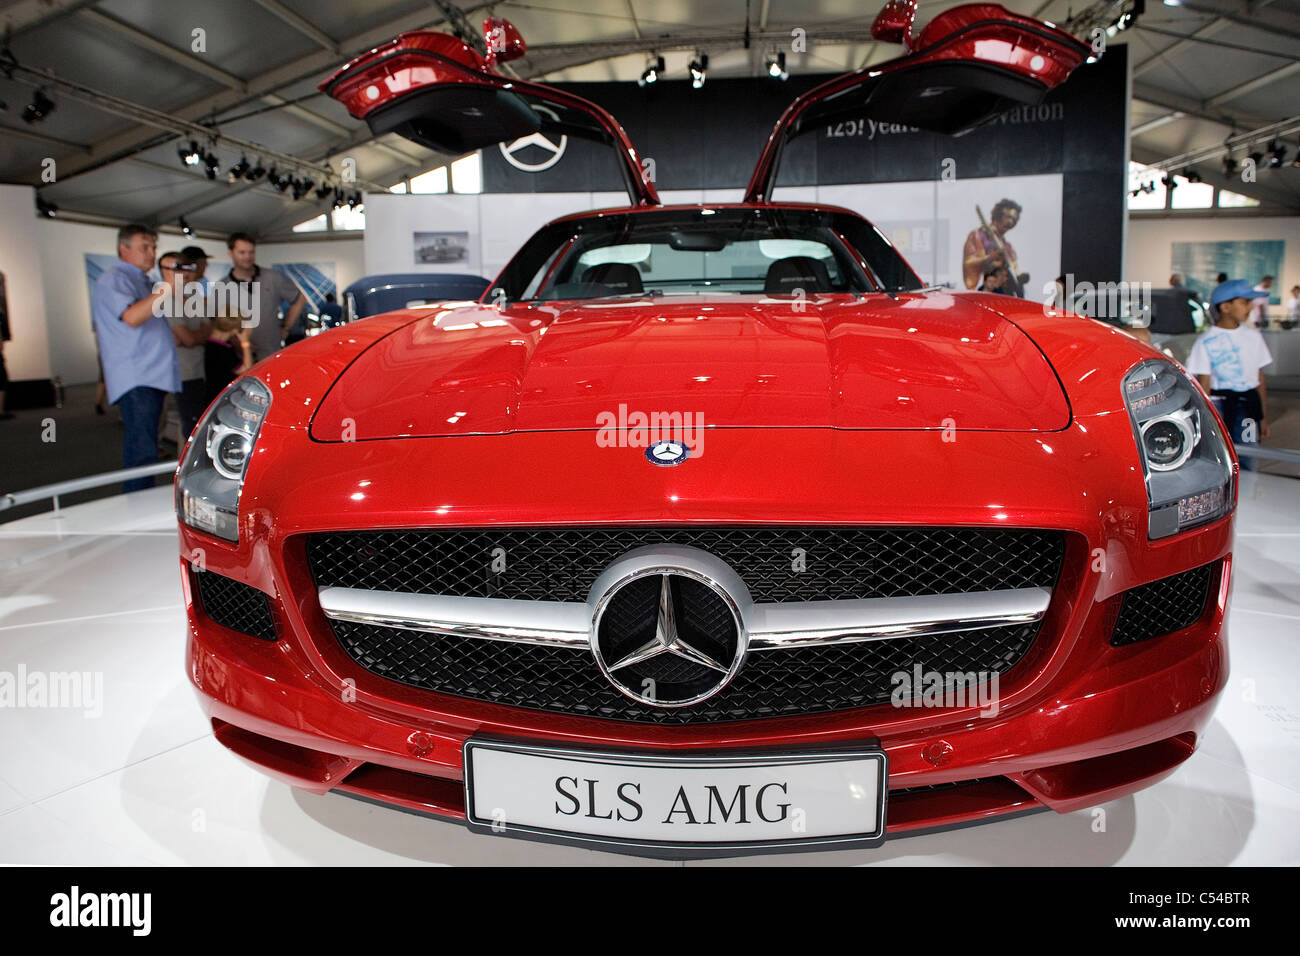 Mercedes SLS car at Goodwood Festival of Speed, 2011 Stock Photo